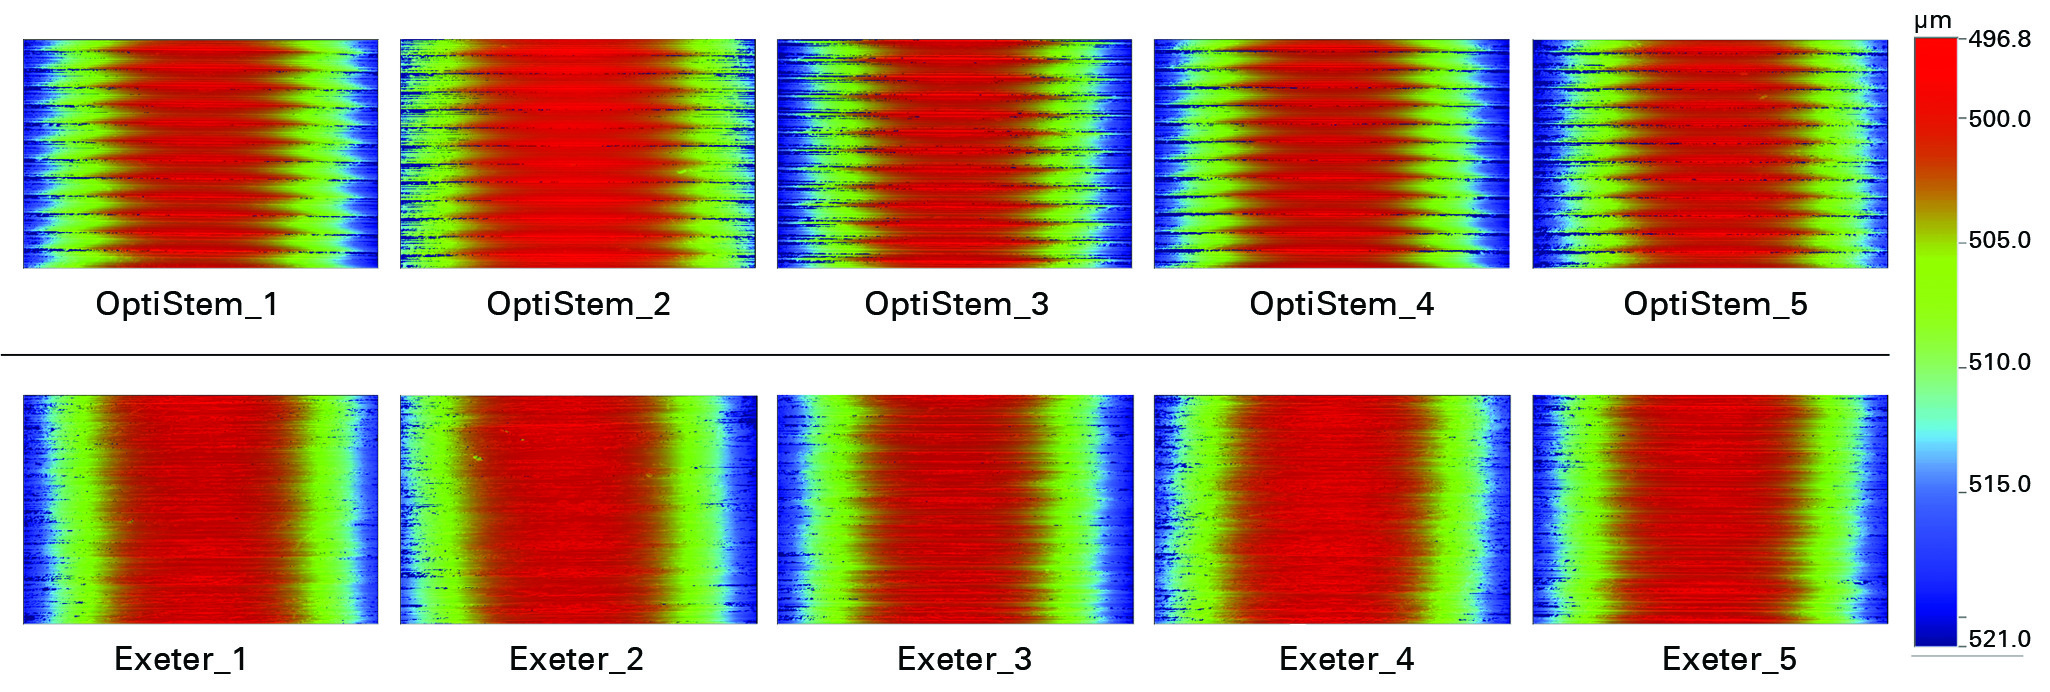 Fig. 4 
            Examples of the imaging scans generated
by the optical profilometer for the ten stem trunnions. The OptiStem
trunnions (top row) have a visibly more threaded surface topography
than the Exeter trunnions; the depth is greater and the peaks are
spaced a greater distance apart.
          